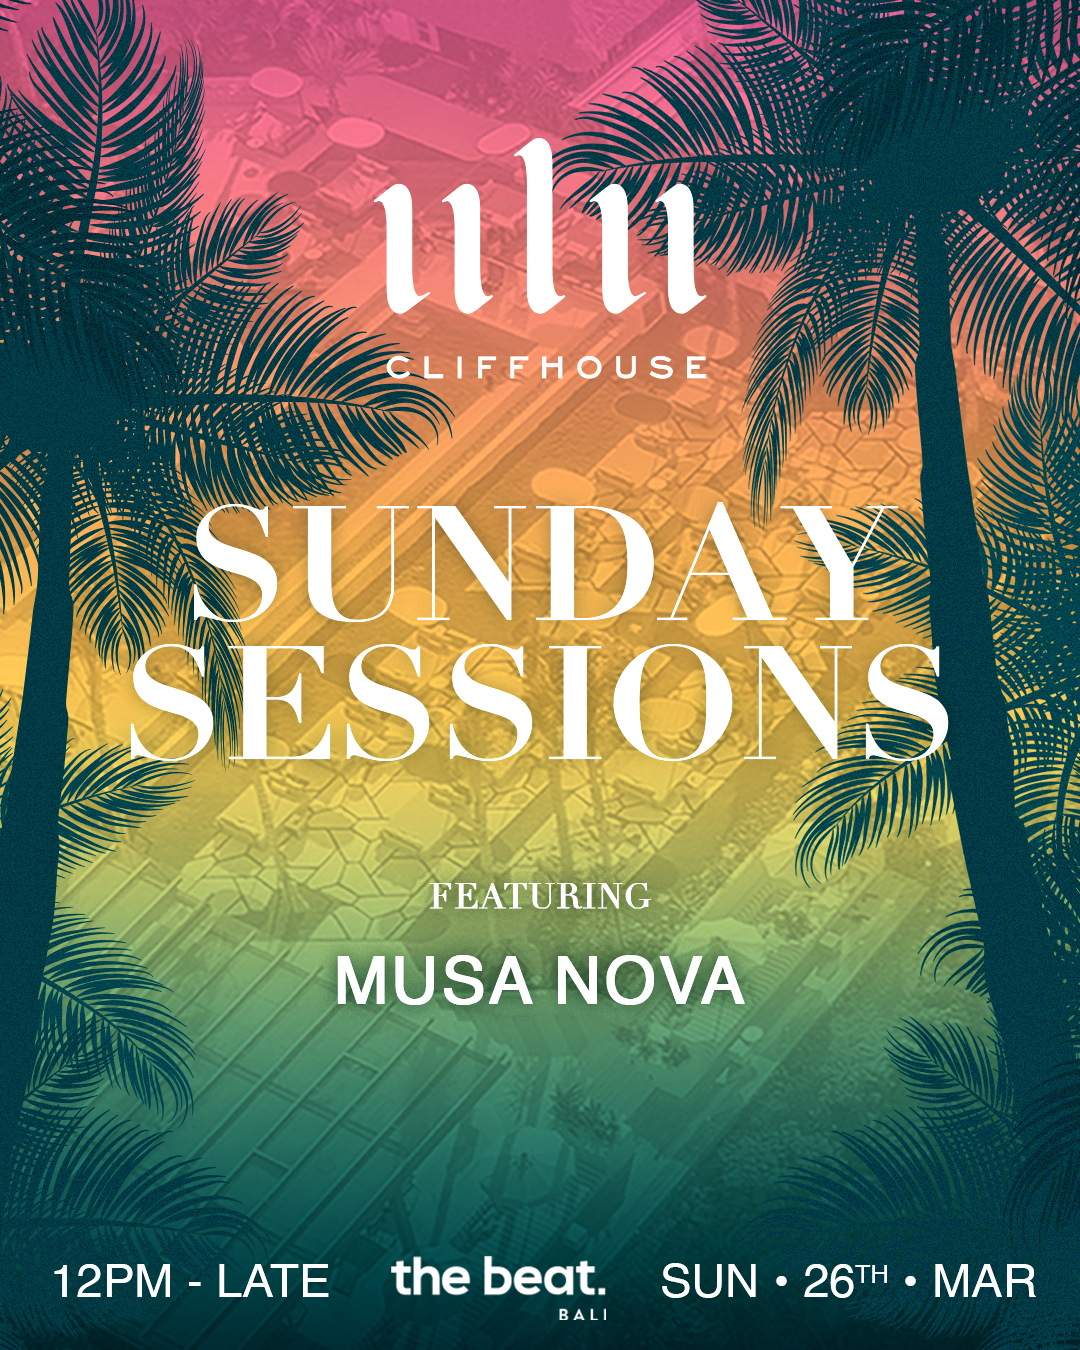 SUNDAY SESSIONS AT ULU CLIFFHOUSE – MARCH 26TH thumbnail image